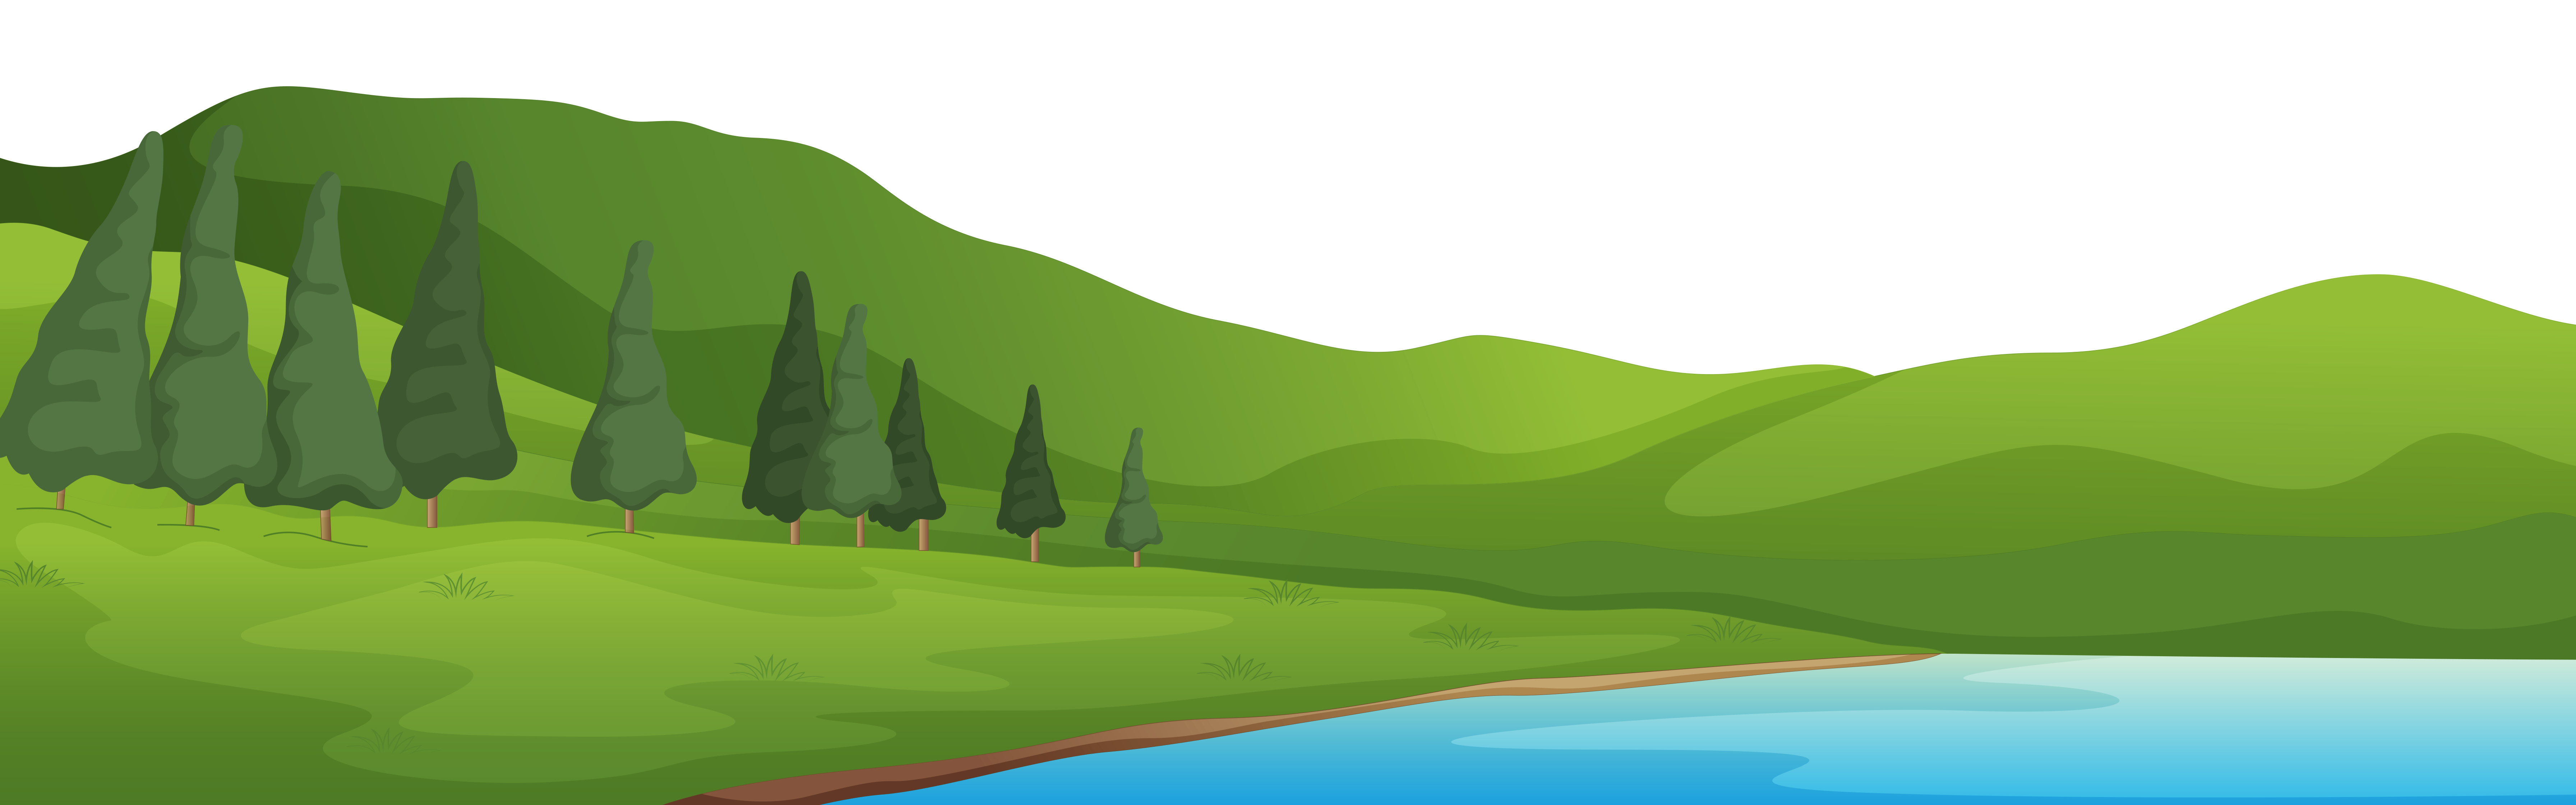 Clipart road side view. Mountain and lake ground